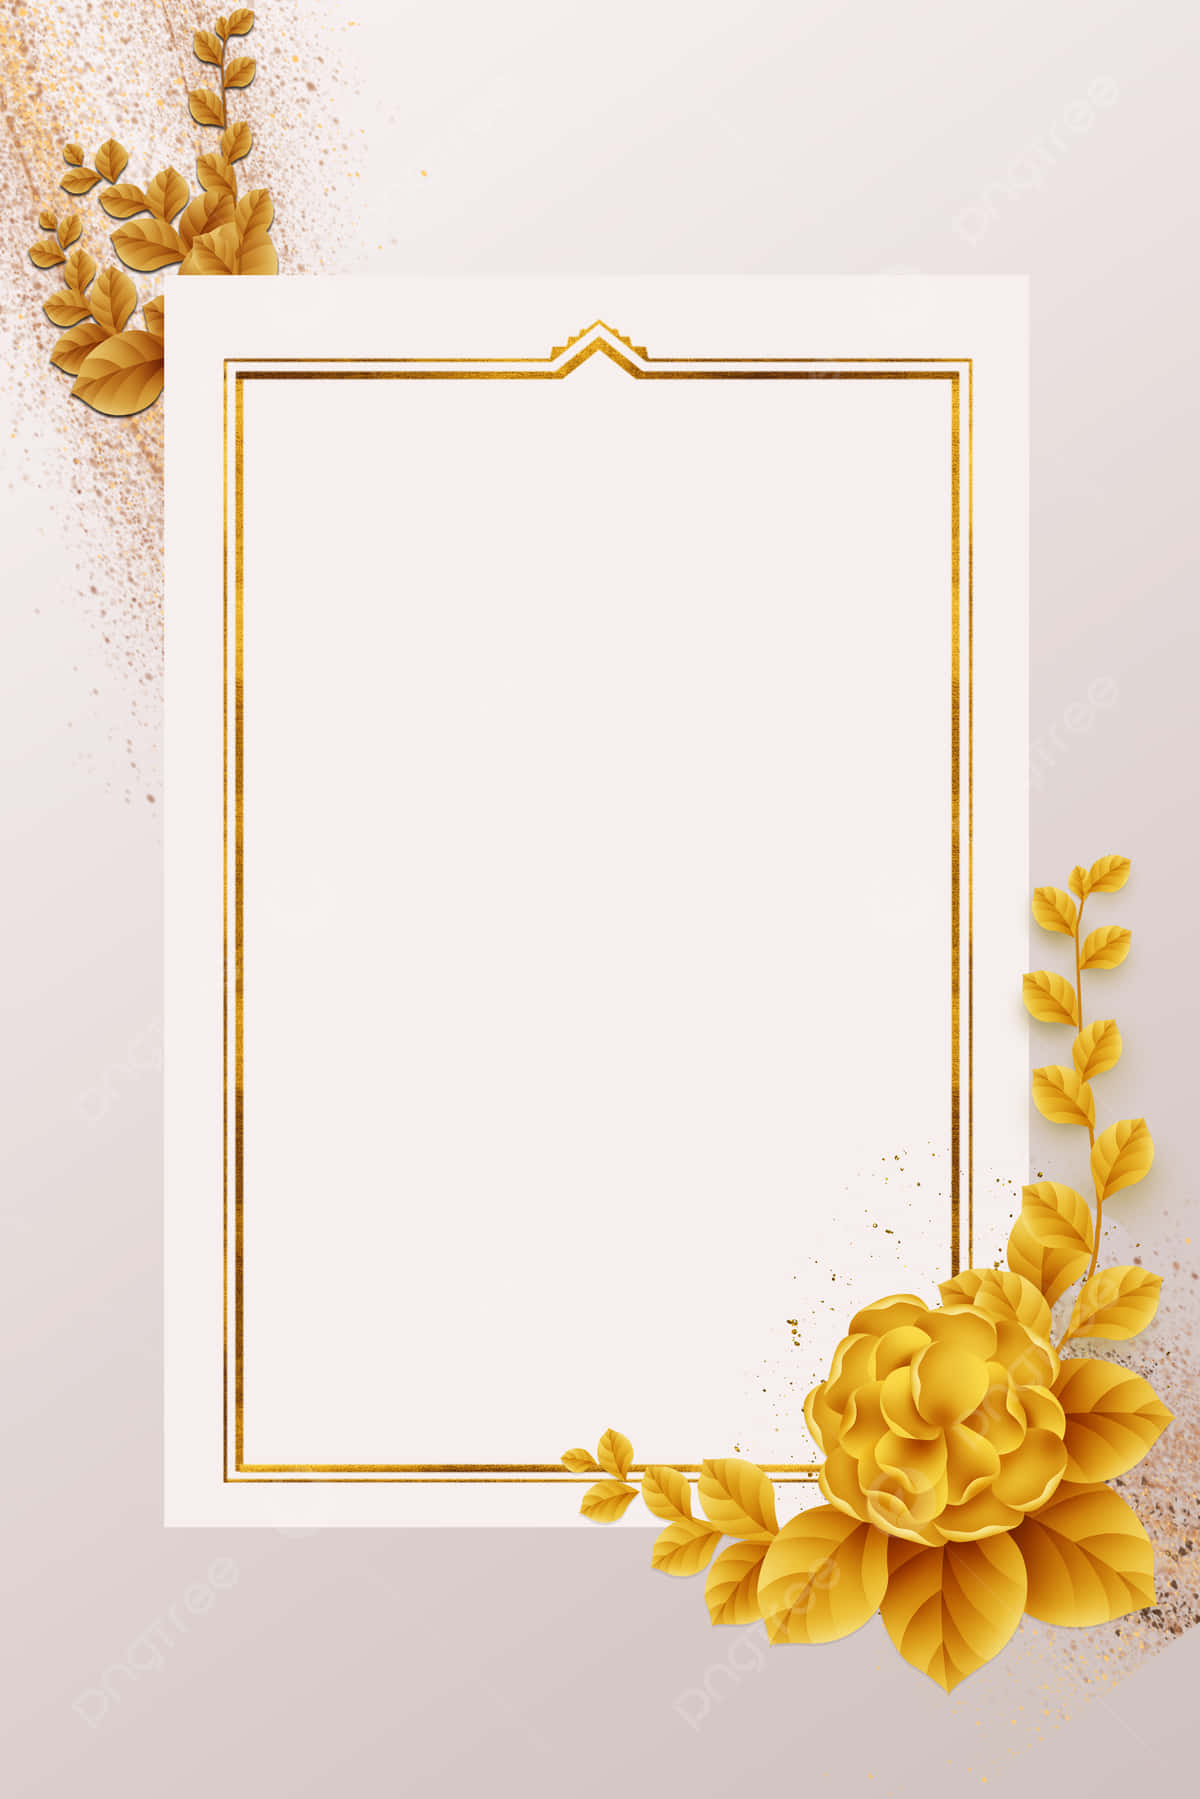 Gold Frame And Flowers Wedding Invitation Background